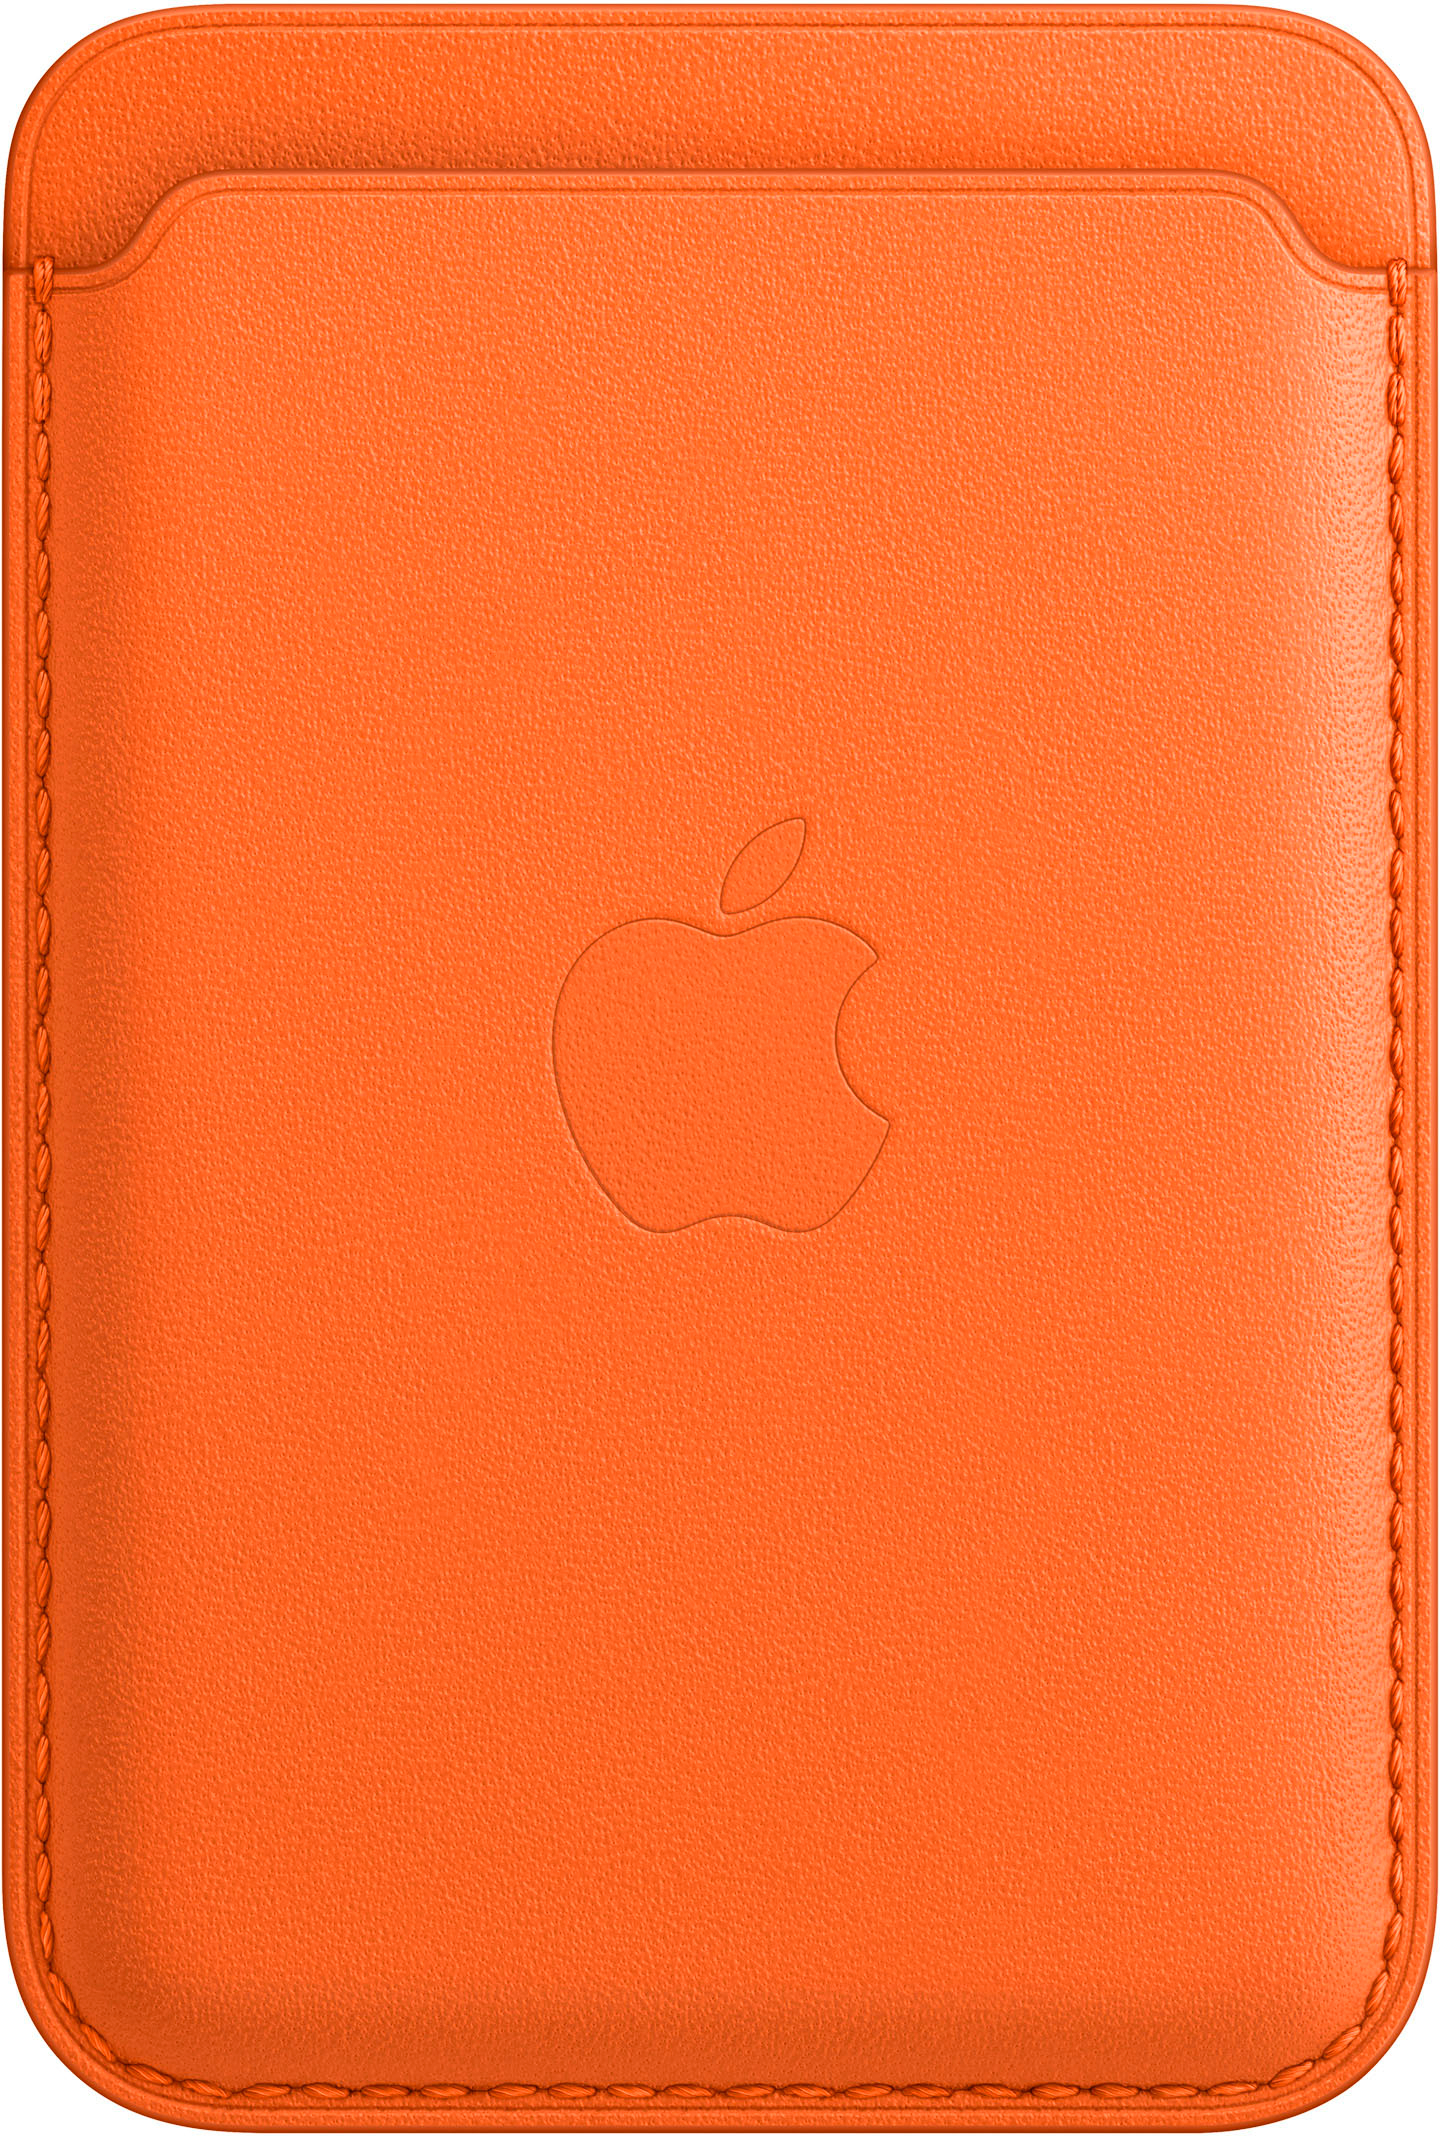 Apple iPhone Leather Wallet with MagSafe - Midnight  Leather iphone wallet,  Iphone leather, Leather wallet